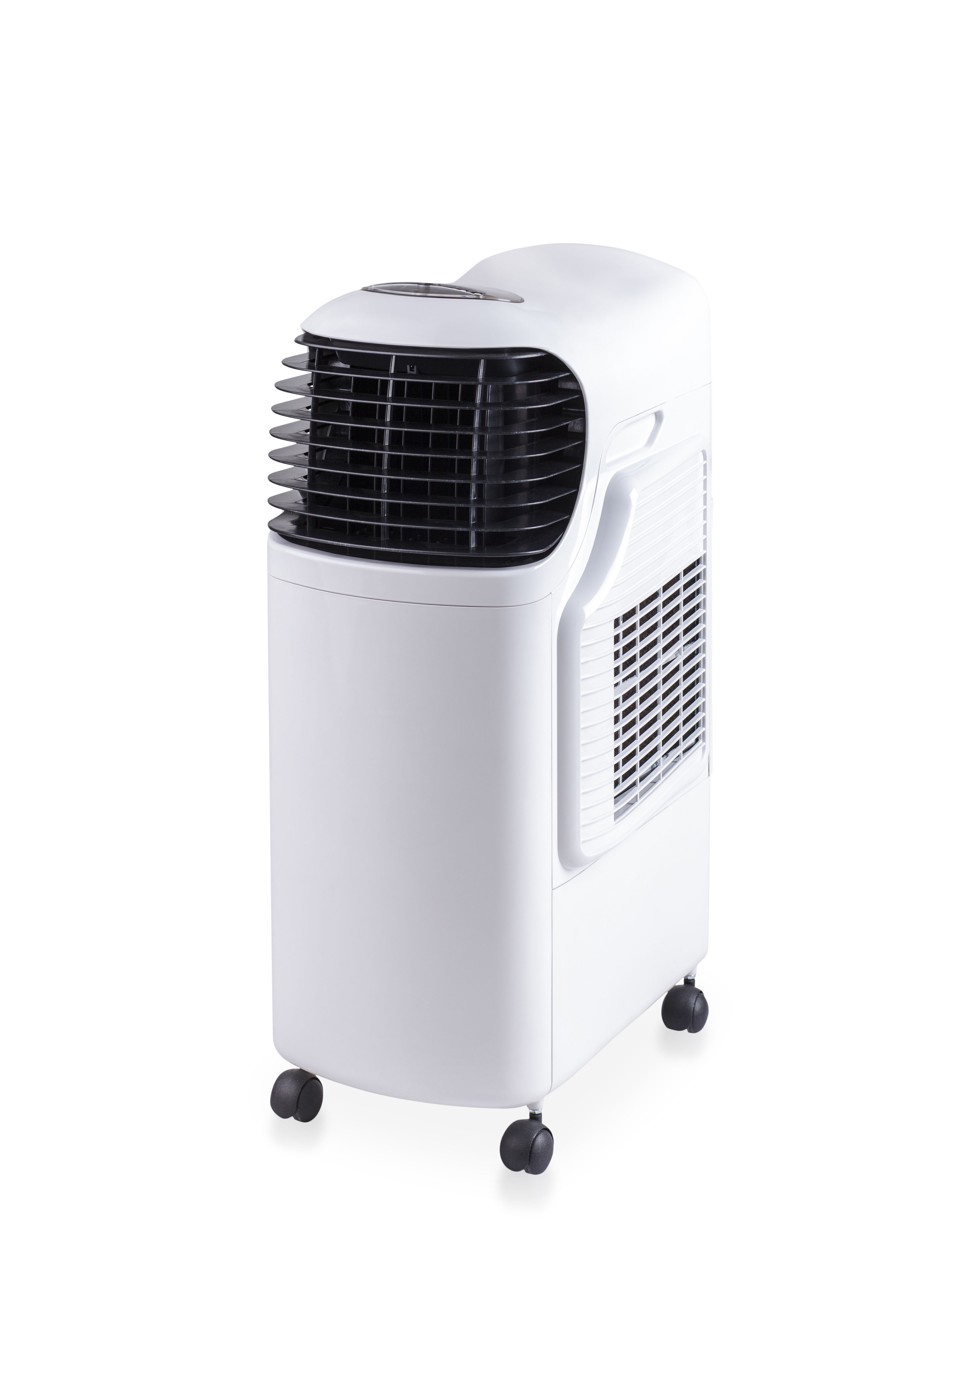 An air cooler fan could reduce the risk of formaldehyde being released into the air.